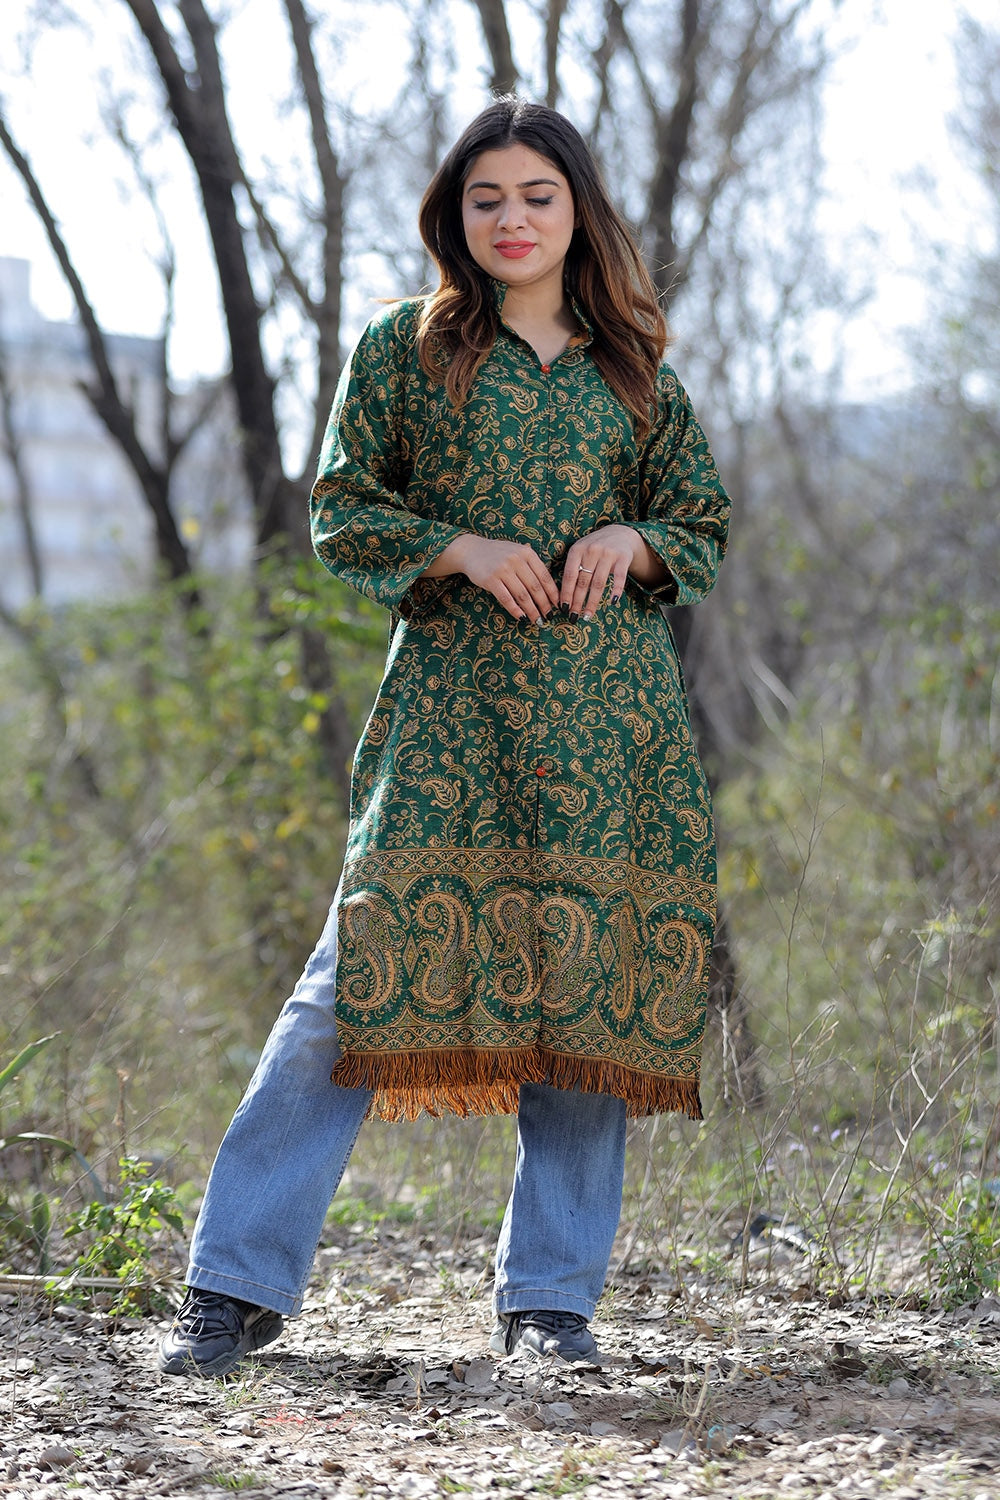 Buy ACEOLA Women's Black Short Cotton Kurti with Green Embroidery (Aari  Work) at Amazon.in